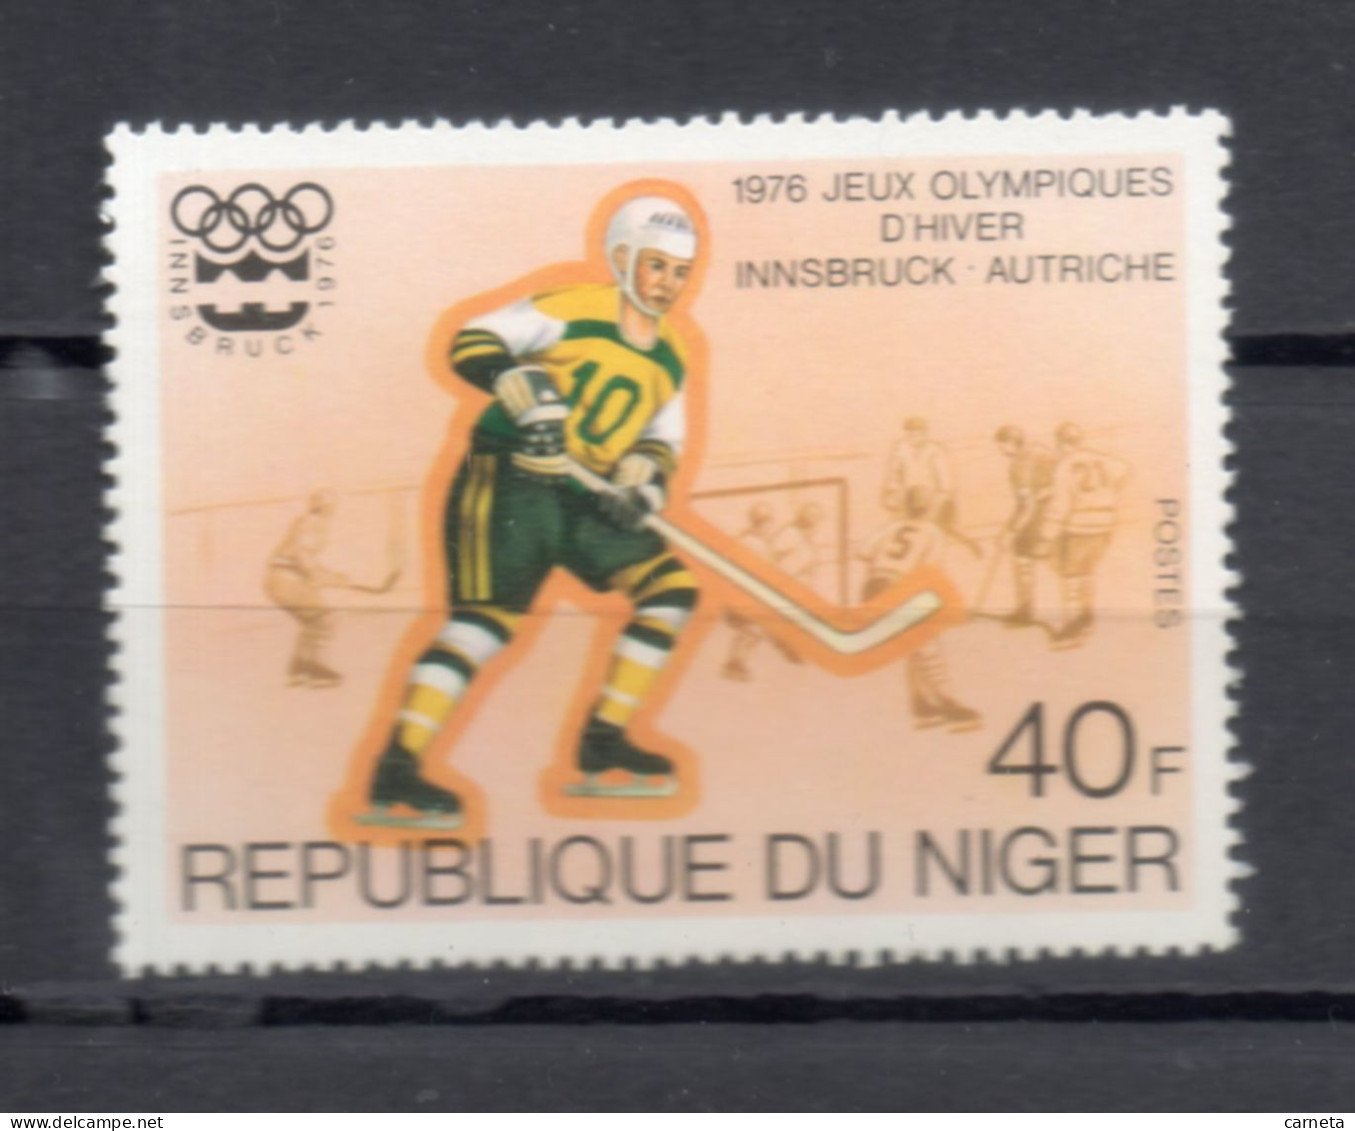 NIGER   N° 352    NEUF SANS CHARNIERE  COTE 0.70€   JEUX OLYMPIQUES INNSBRUCK SPORT - Niger (1960-...)